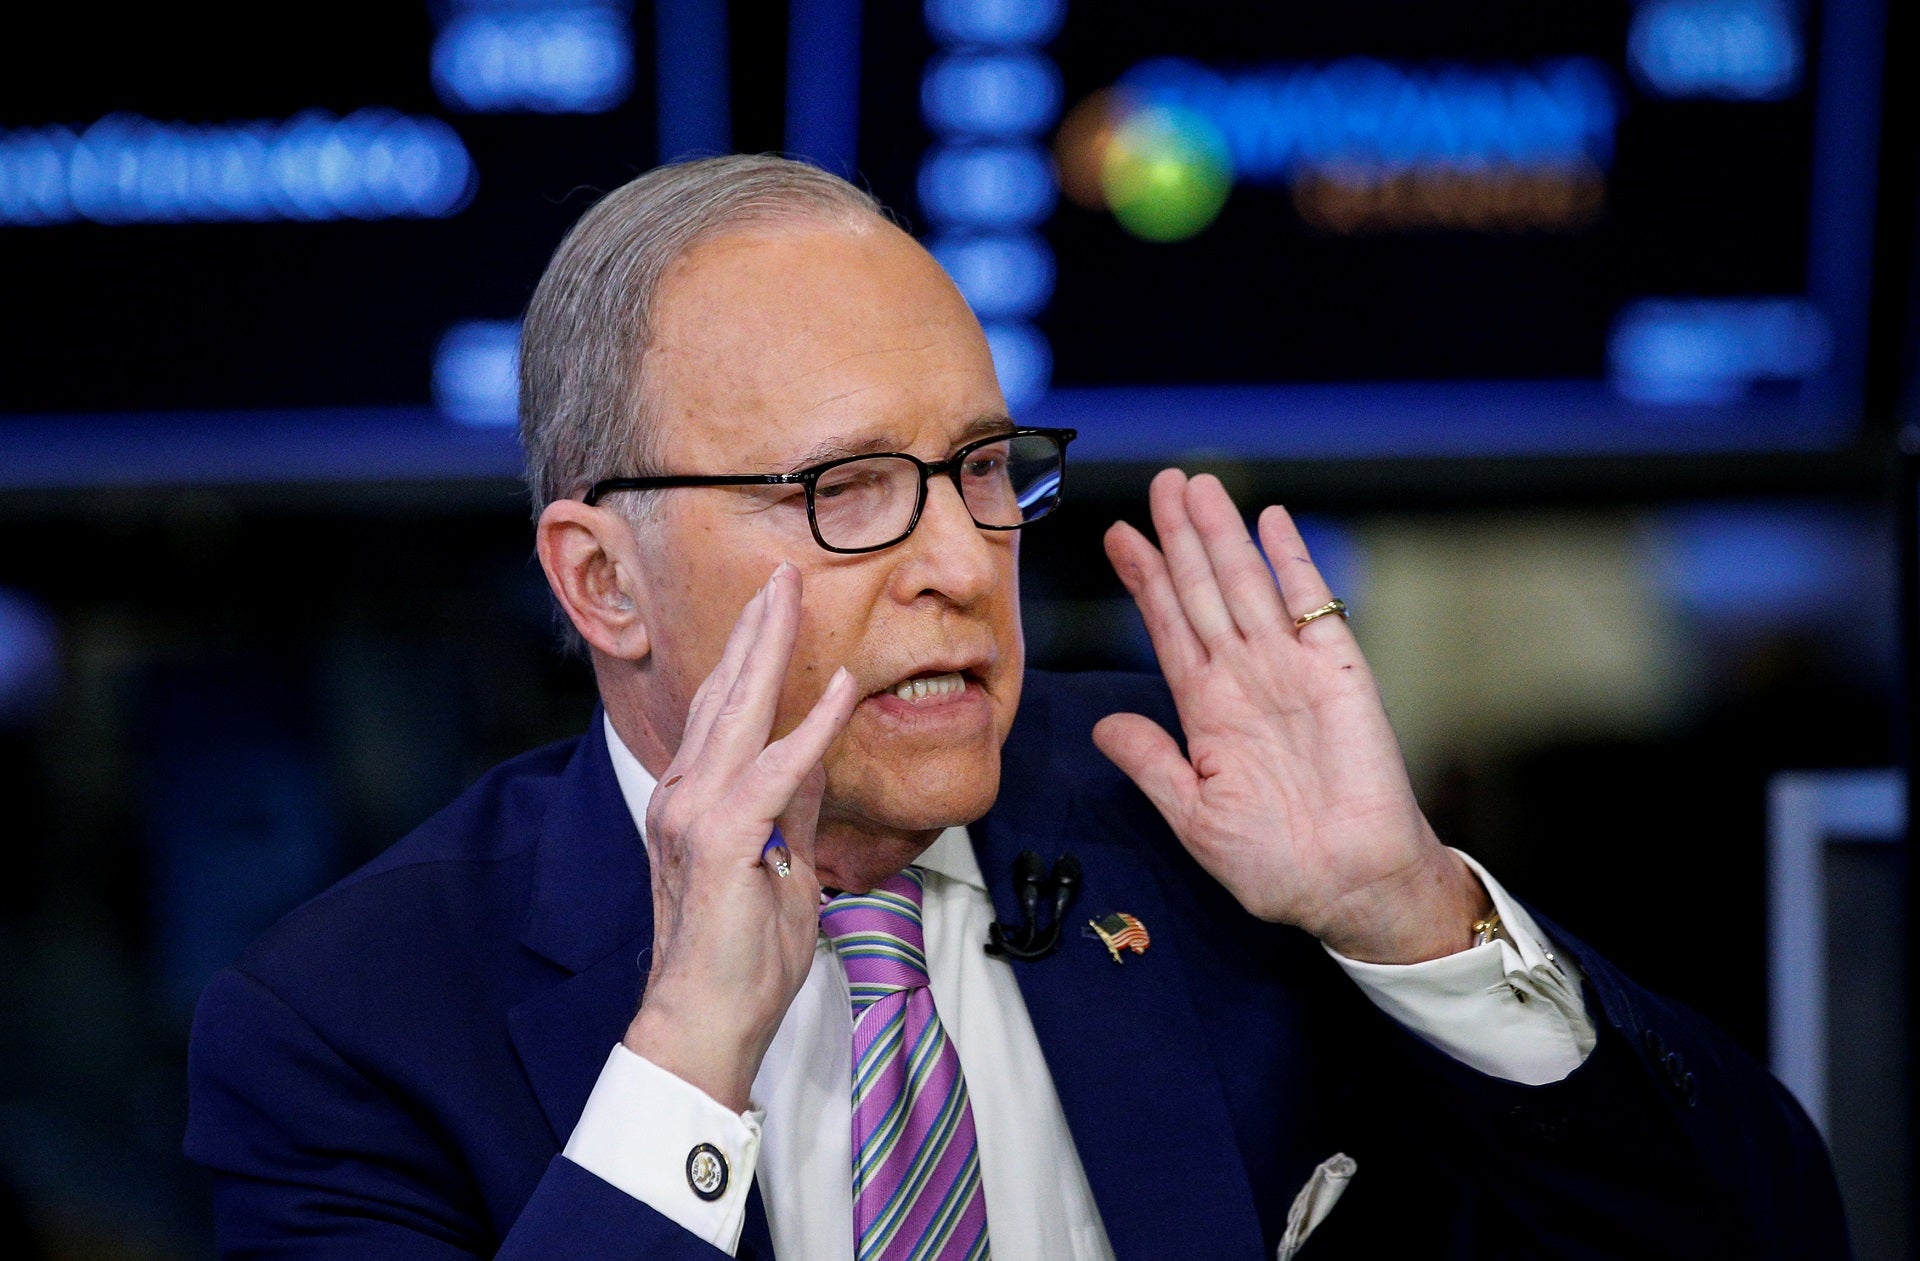 Larry Kudlow on professor's 'absolutely nutty' scolding of student who defended police officers